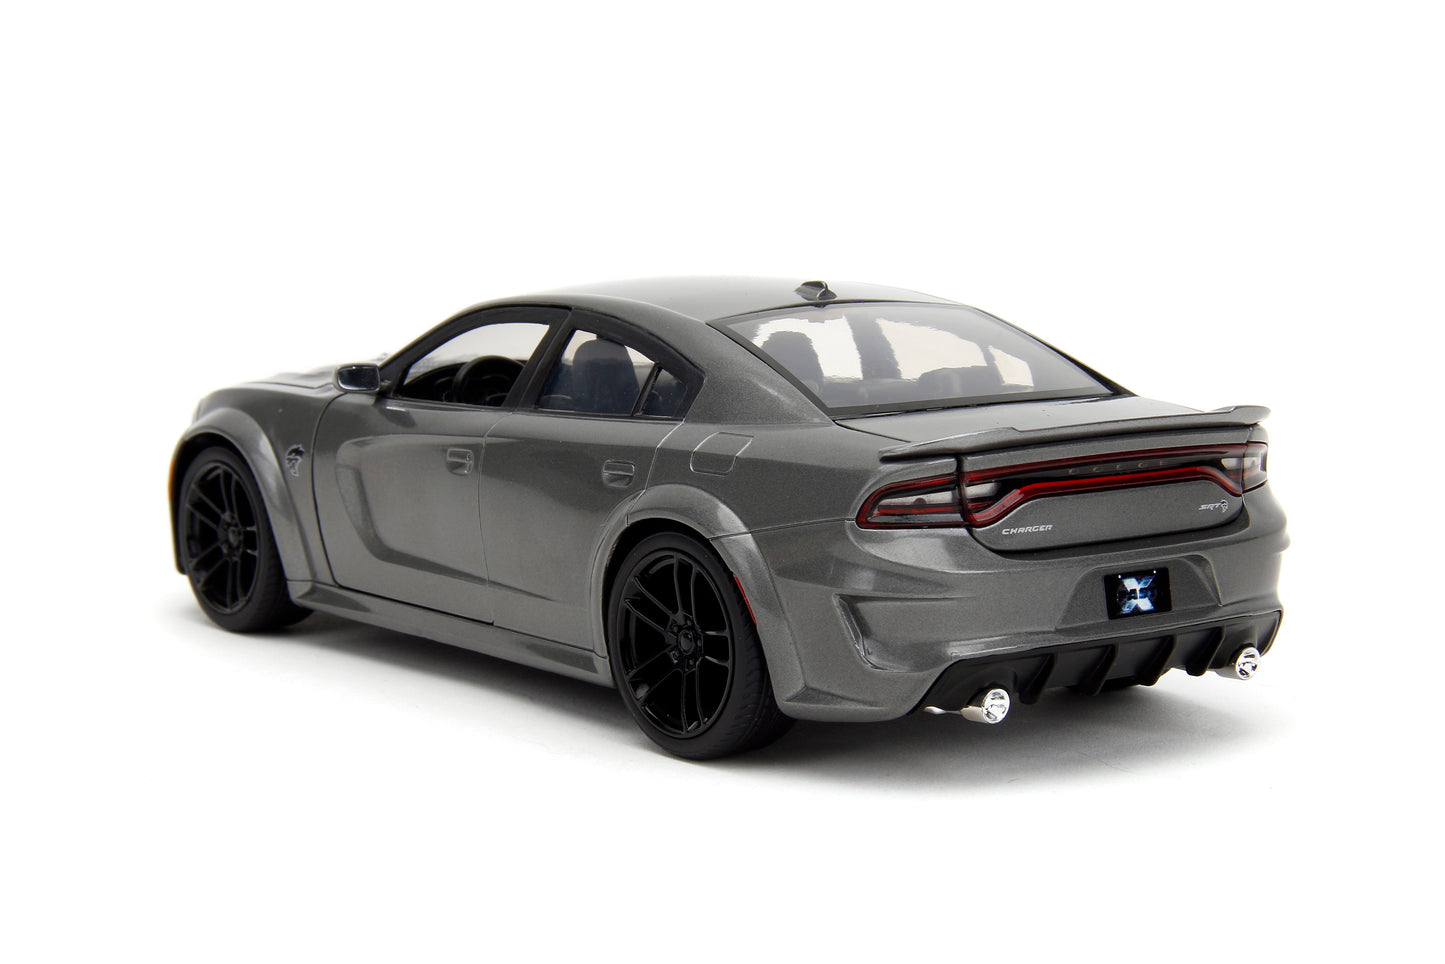 Fast and Furious 1:24 2021 Dodge Charger SRT Hellcat Fast X (THIS IS A PRE-ORDER)